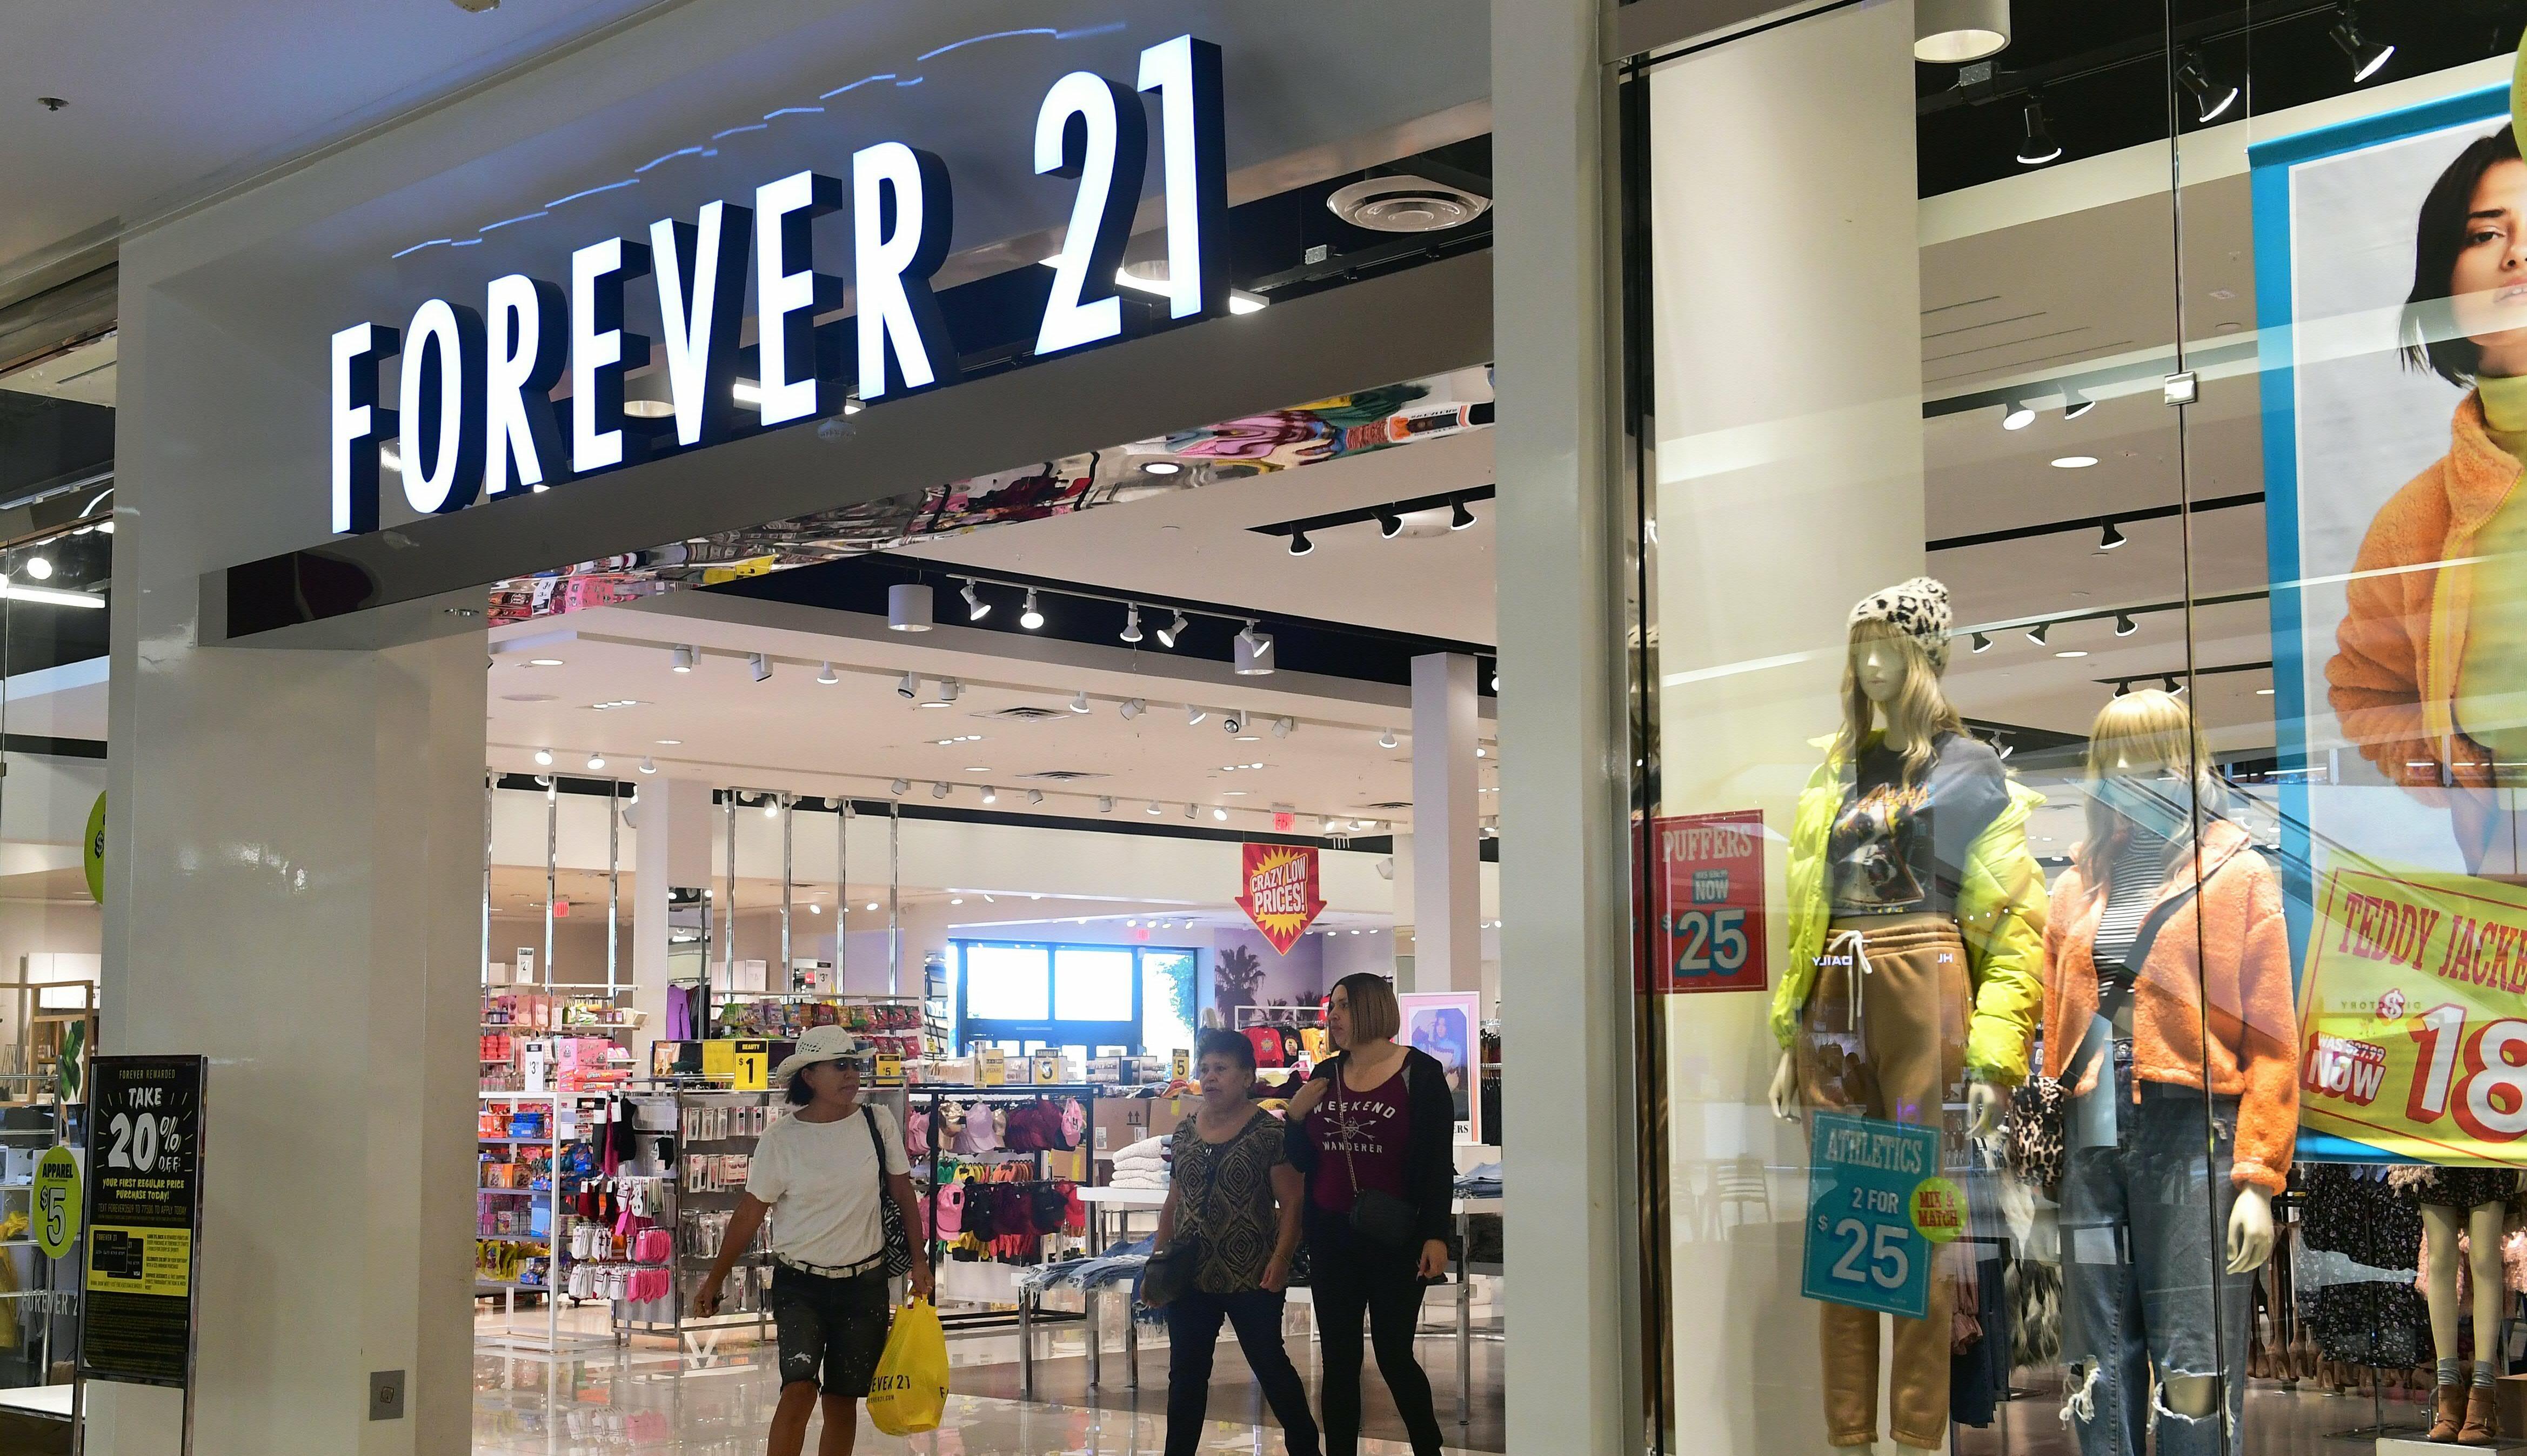 FOREVER 21 - 18 Photos & 10 Reviews - 229 W Towne Mall, Madison, Wisconsin  - Accessories - Phone Number - Yelp